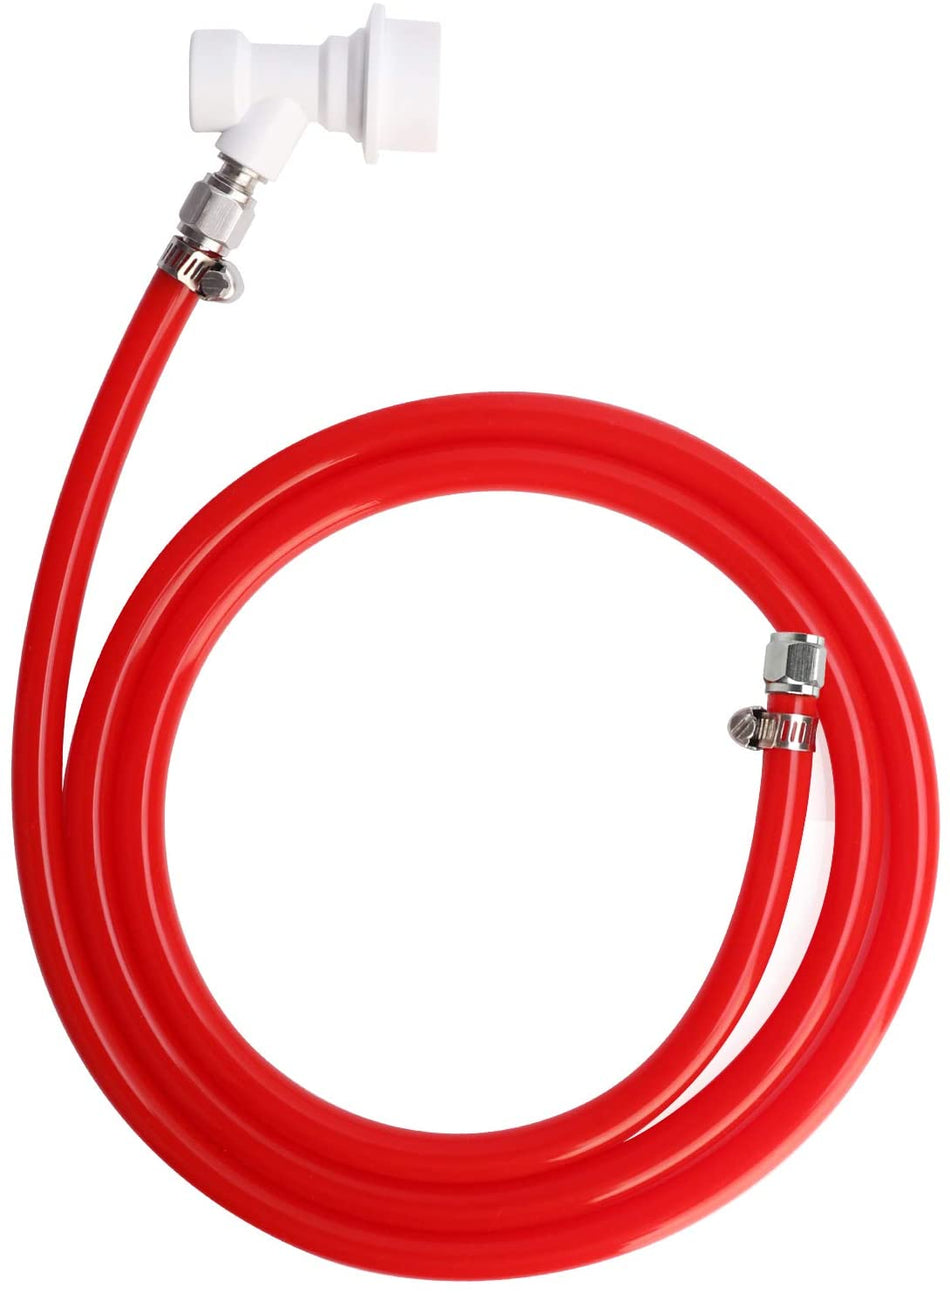 5ft Ball Lock Gas Line, 5/16'' I.D Quick Disconnect Red Gas Hose Assembly with Swivel Nut Barb & Hose Clamps, CO2 Gas Dispensing Tube Kit for Keg Draft Beer Homebrew